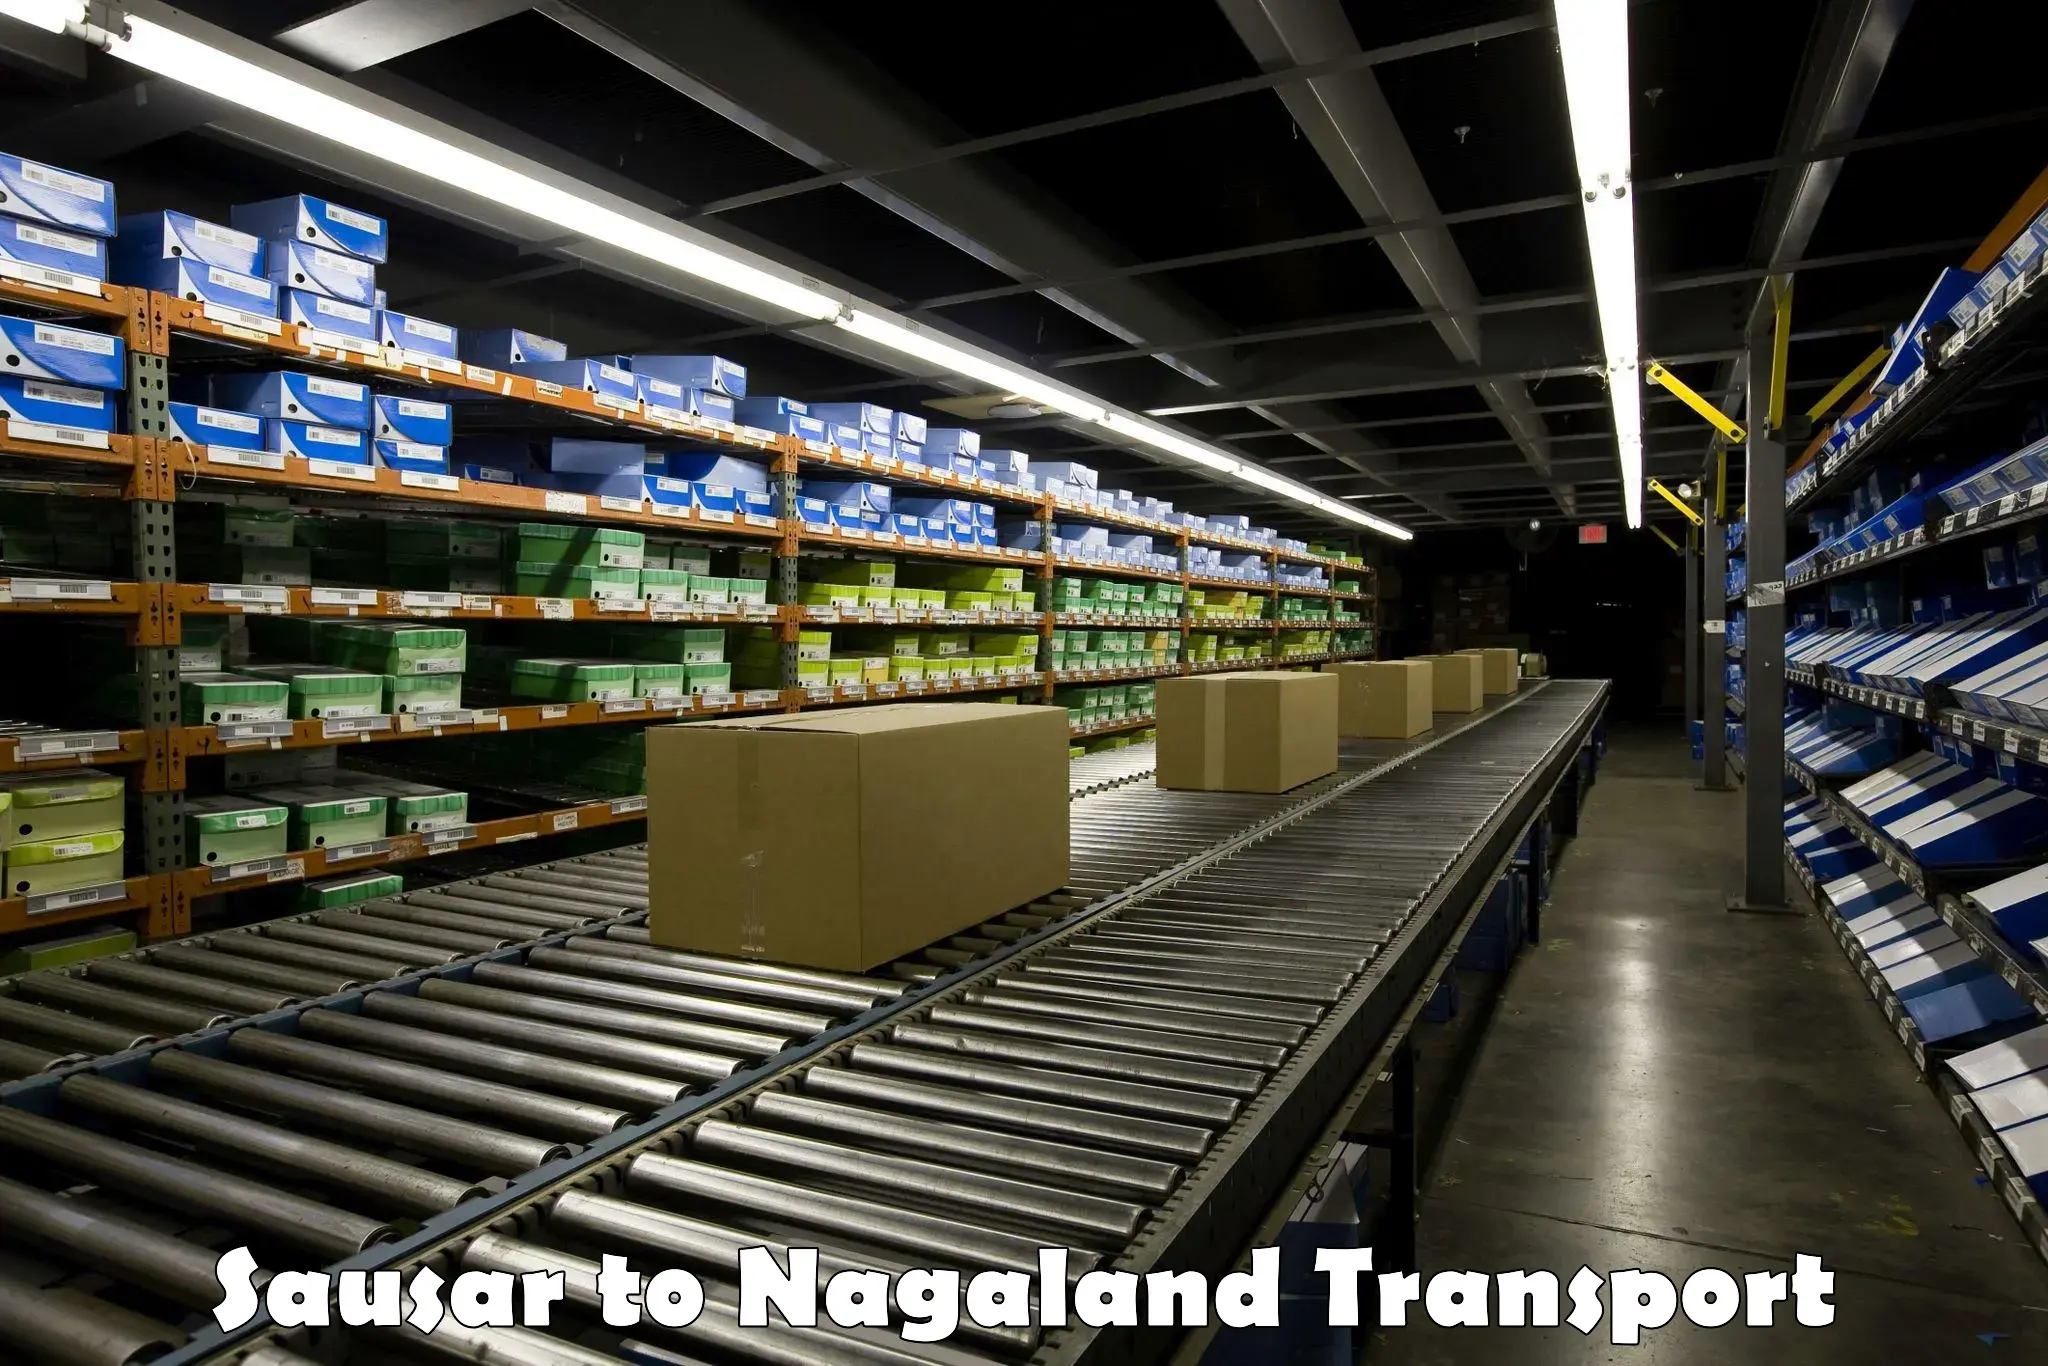 Truck transport companies in India Sausar to Nagaland